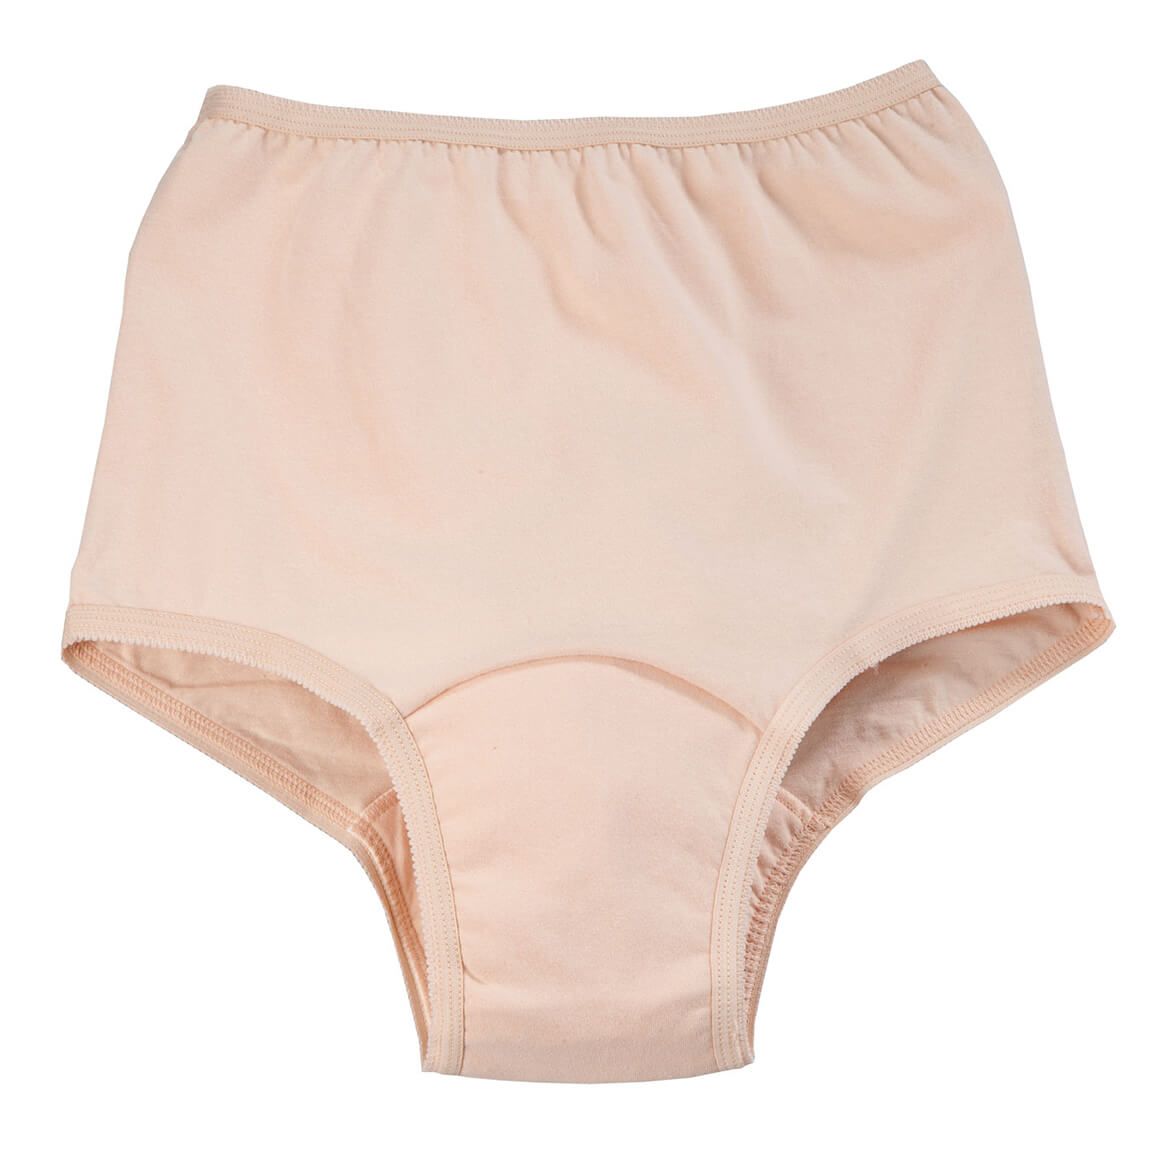 Incontinence Panties for Women – 20 oz. – Beige